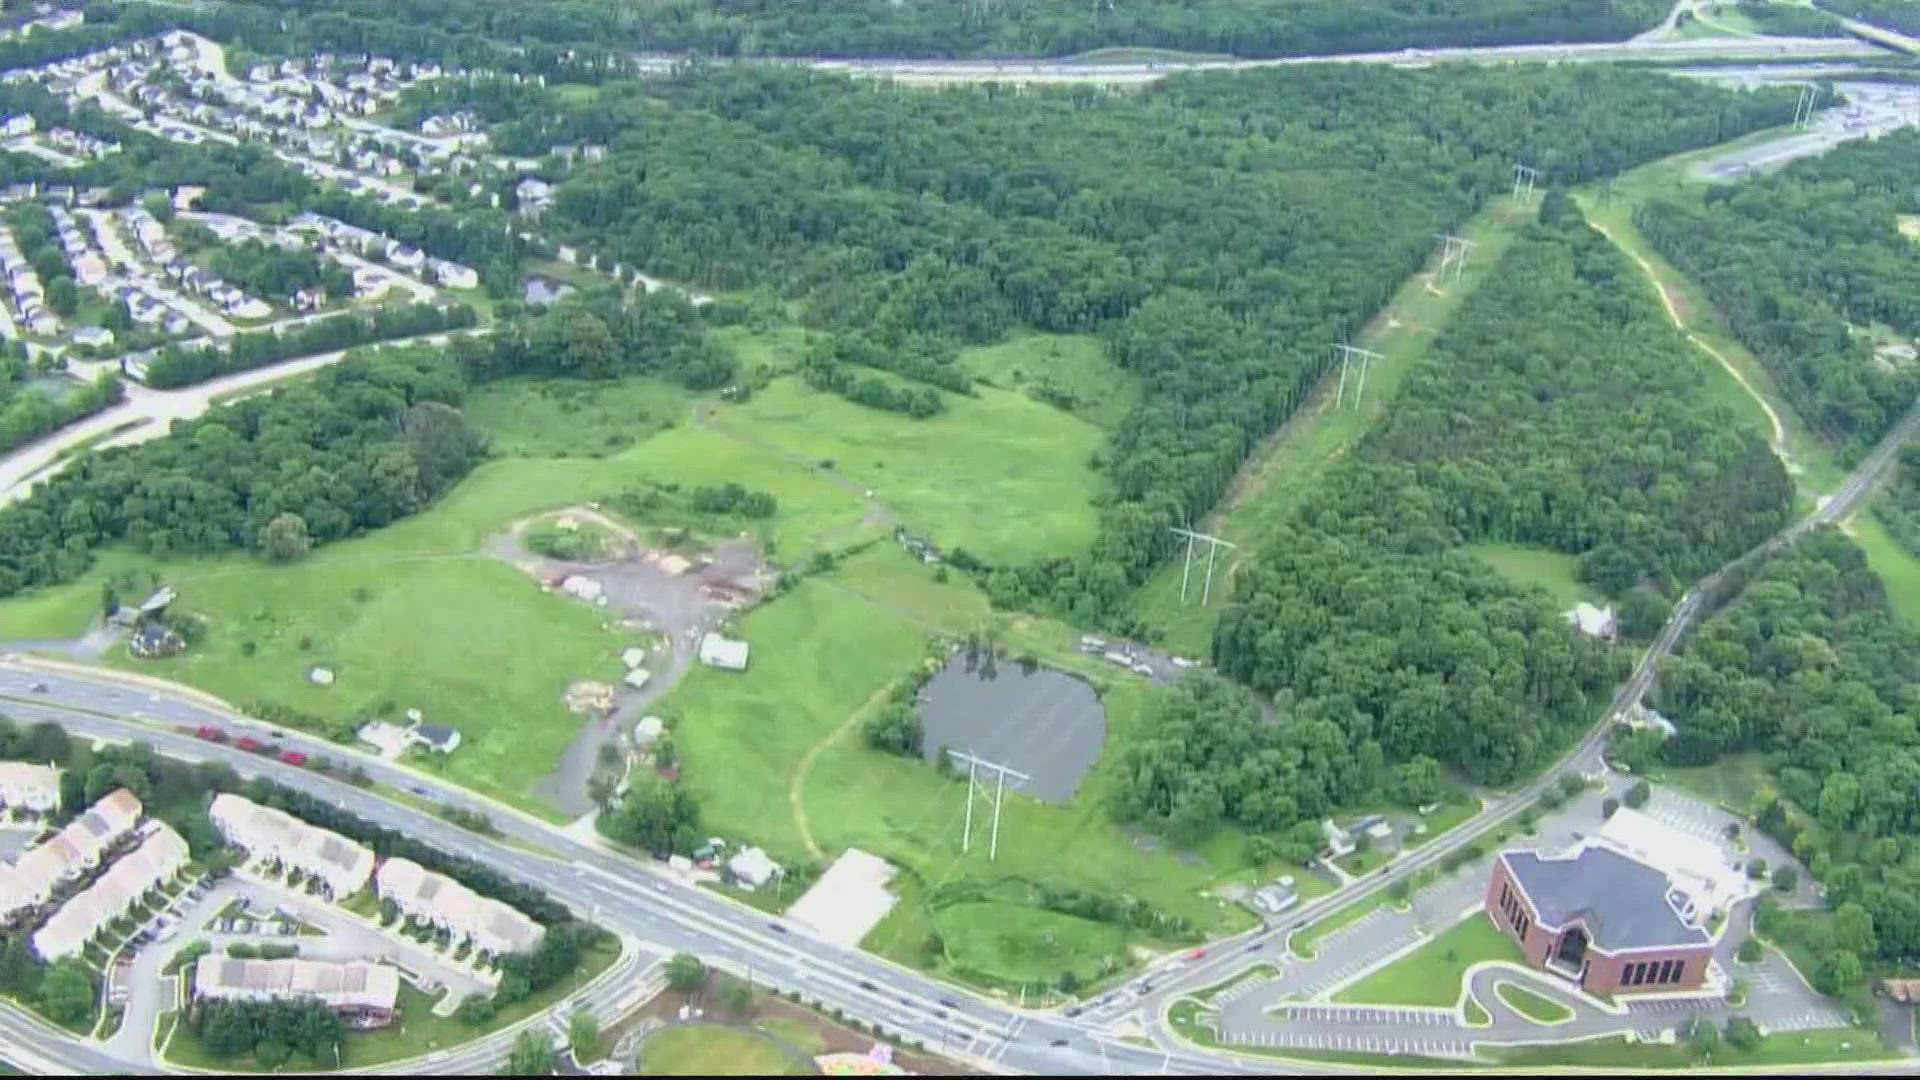 The team may buy the $100 million parcel of land in Prince William County, but the organization still says it is considering several locations in the DMV.